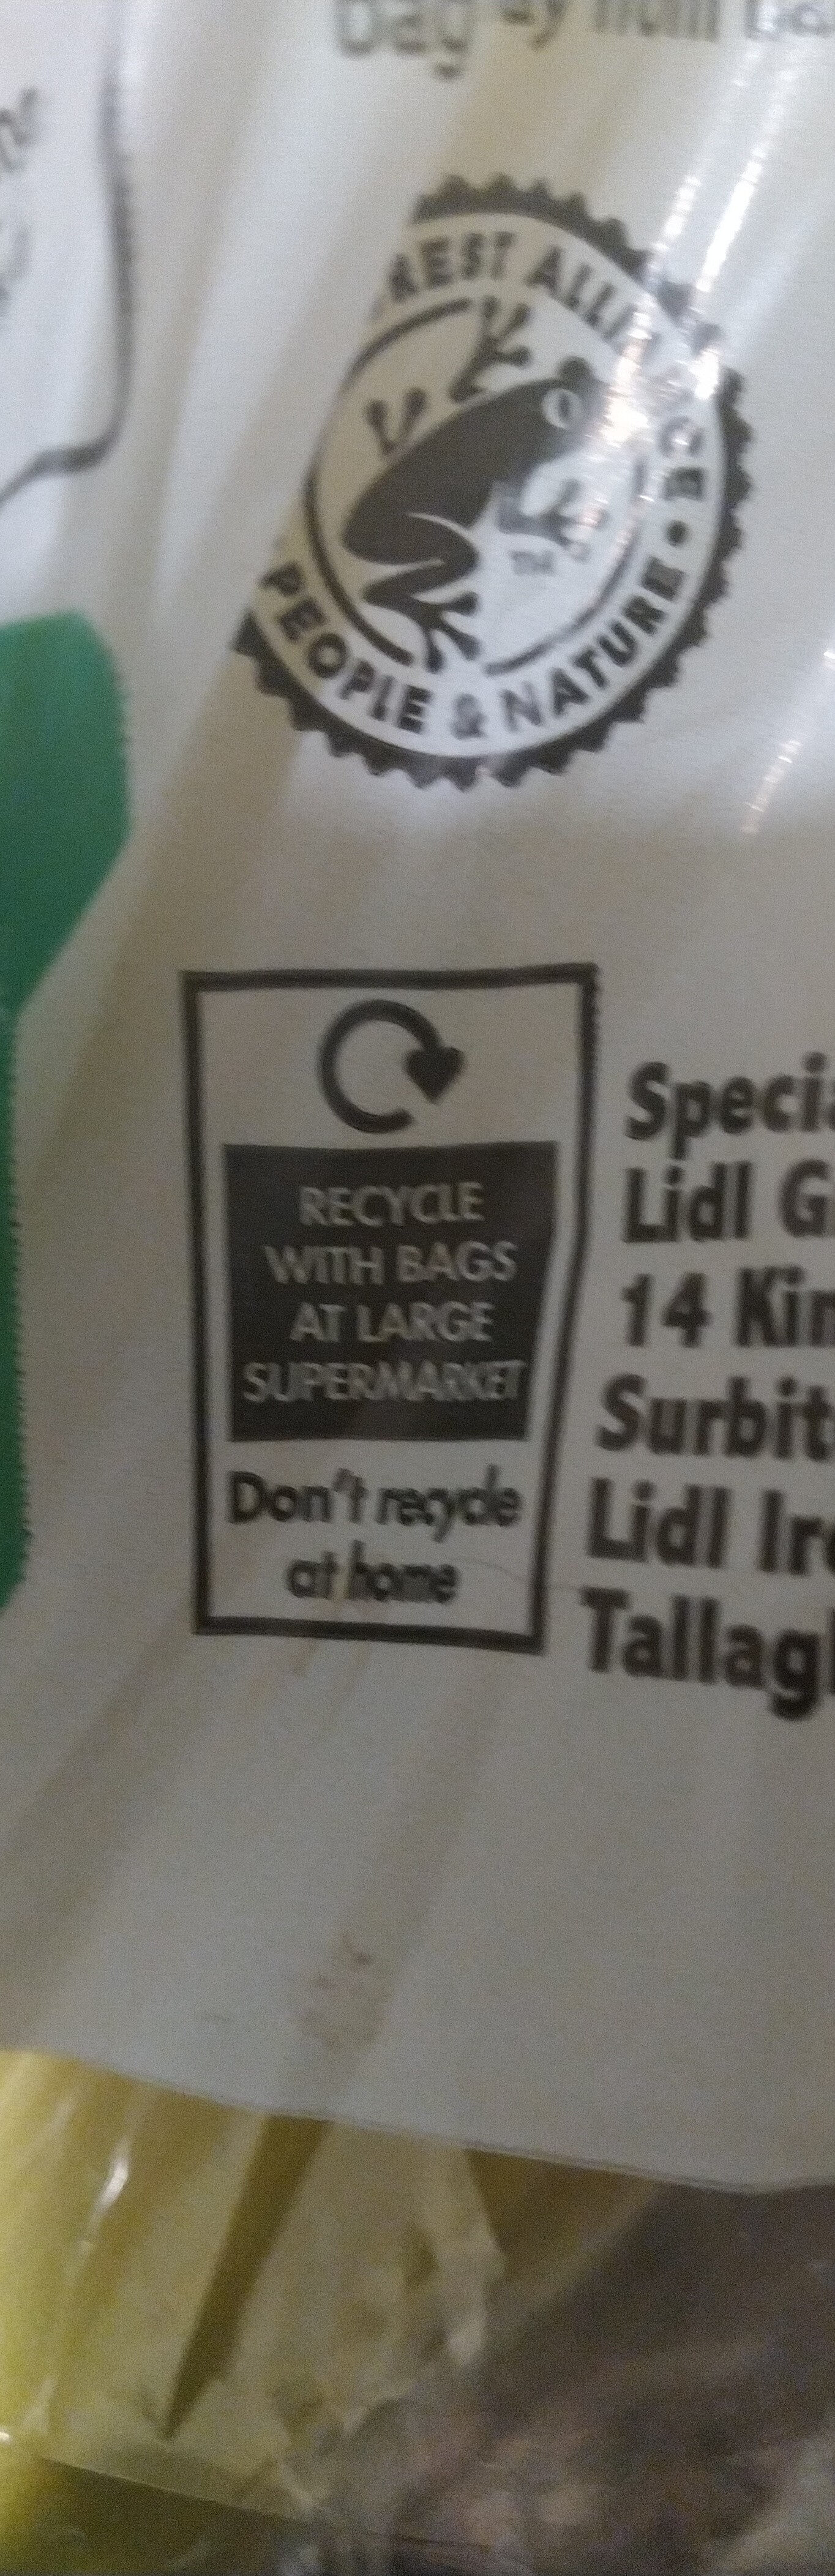 Banane - Recycling instructions and/or packaging information